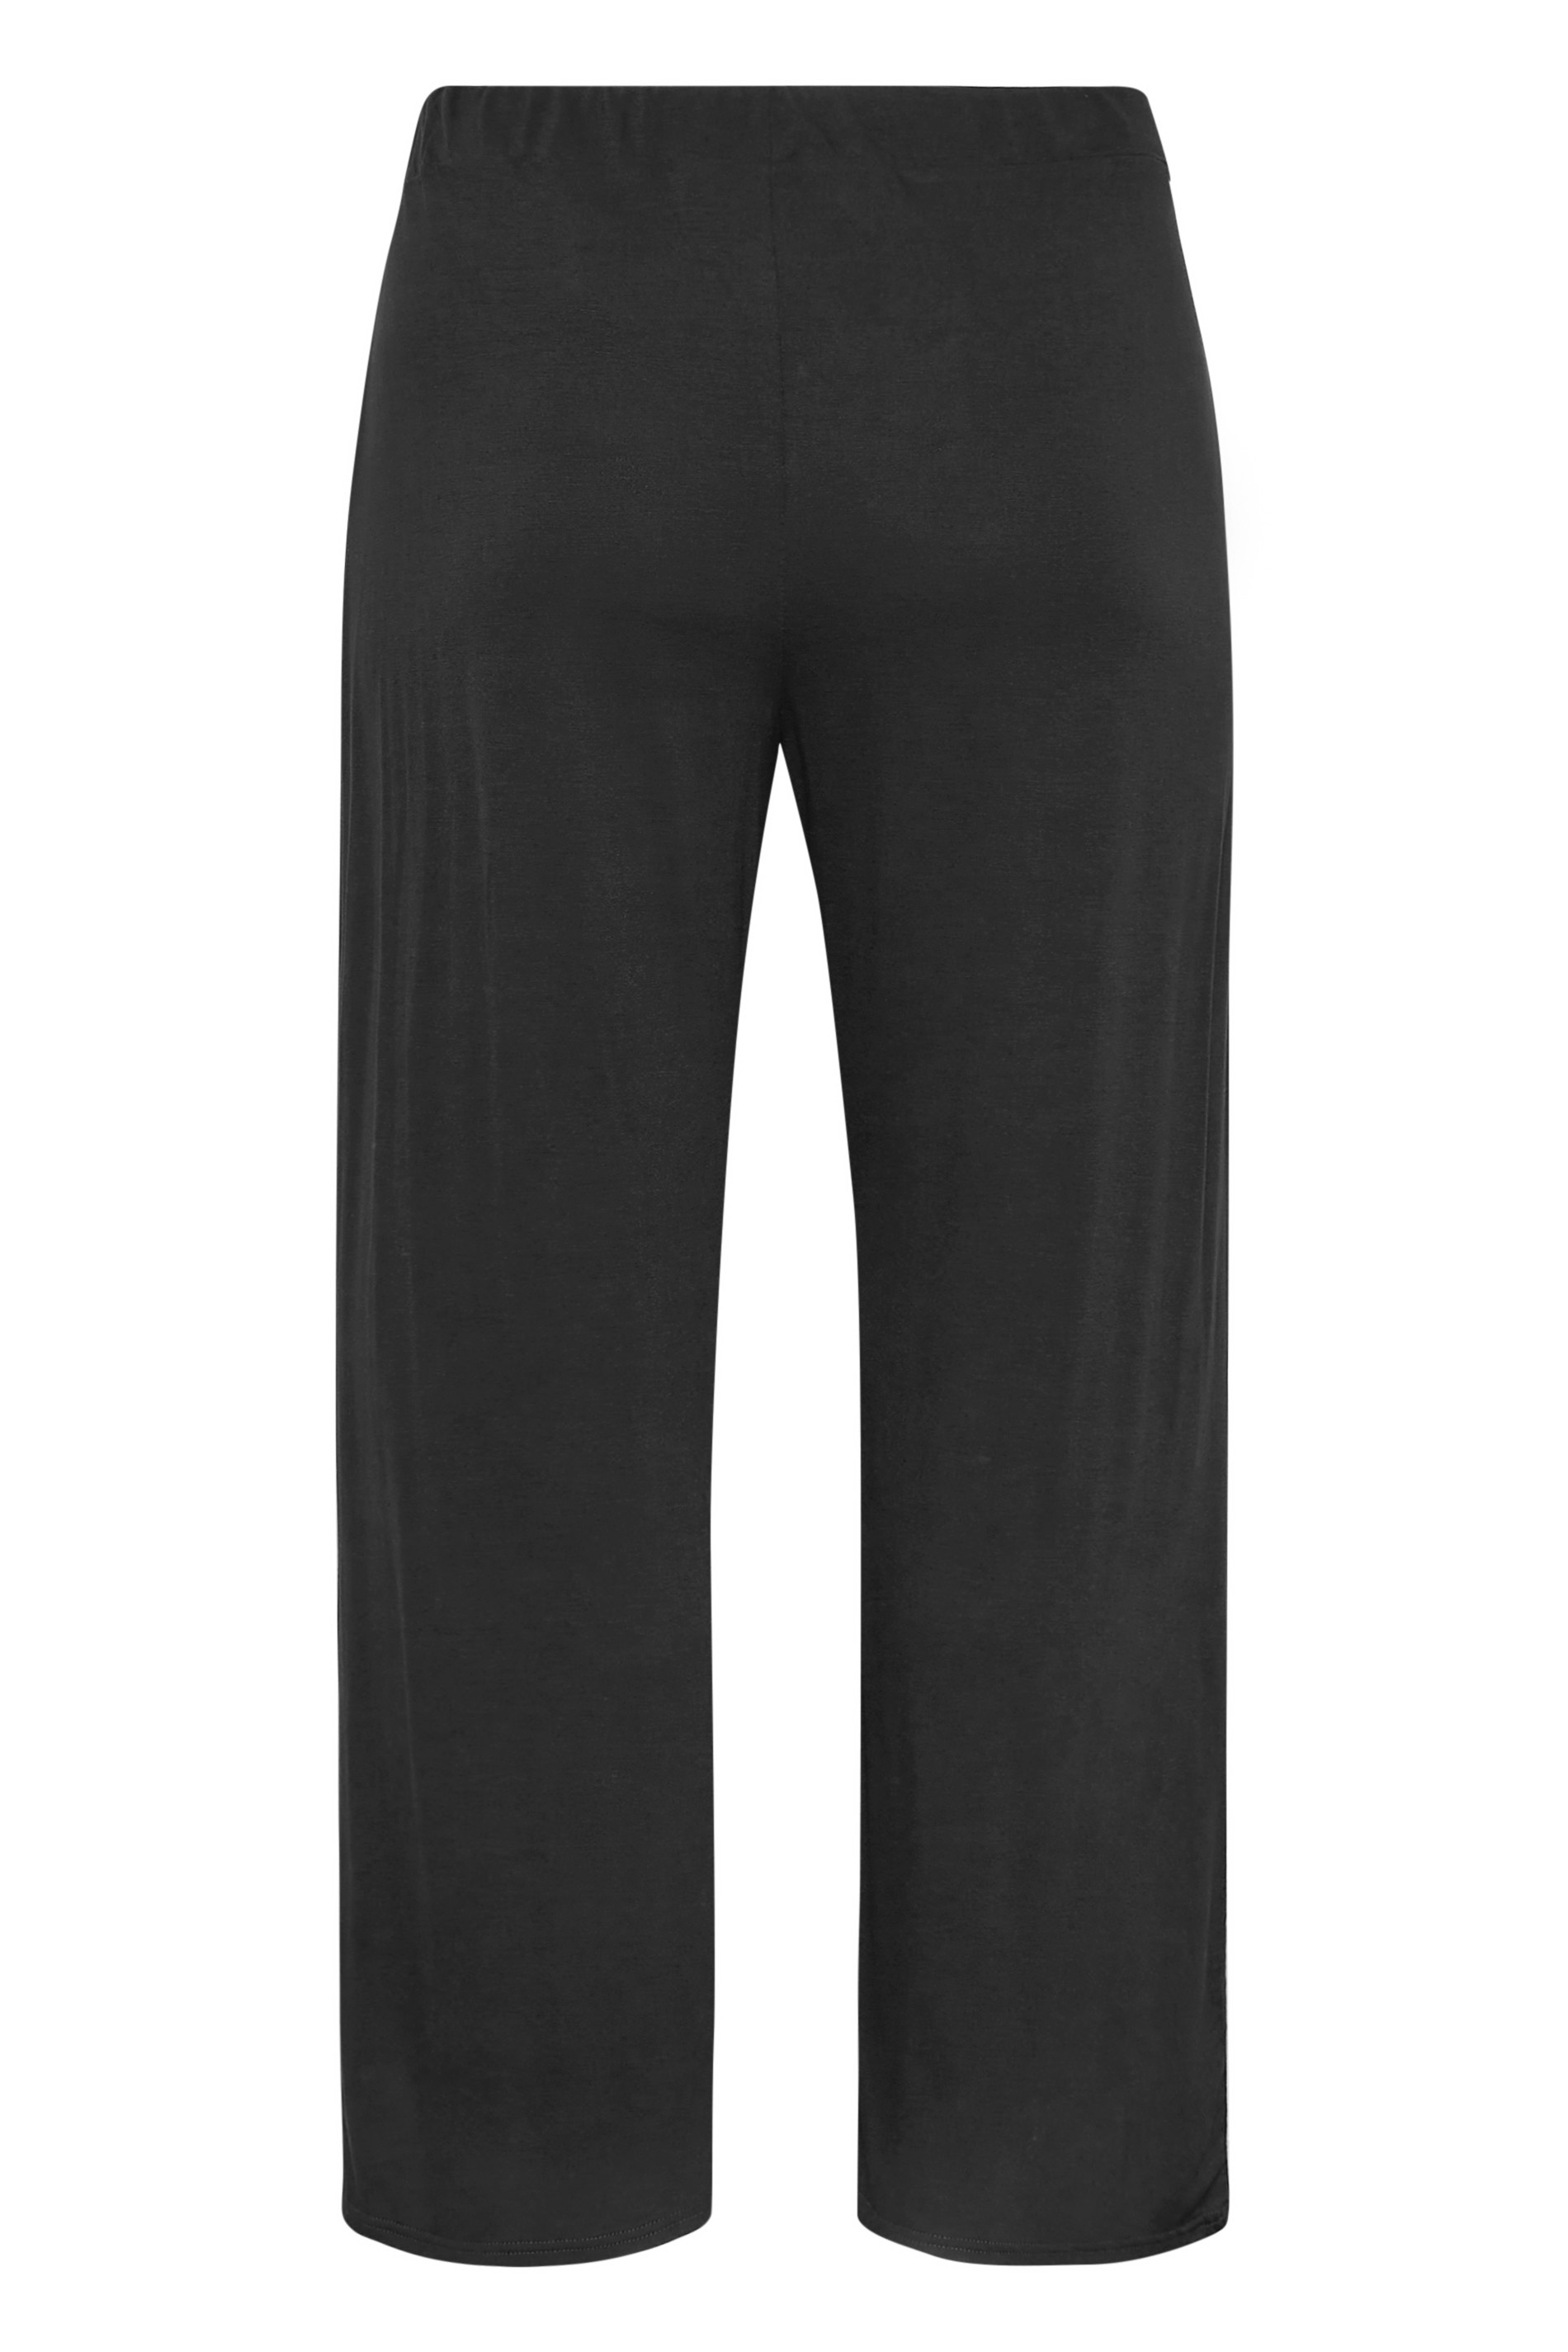 YOURS Plus Size Black Pleat Front Wide Leg Trousers | Yours Clothing